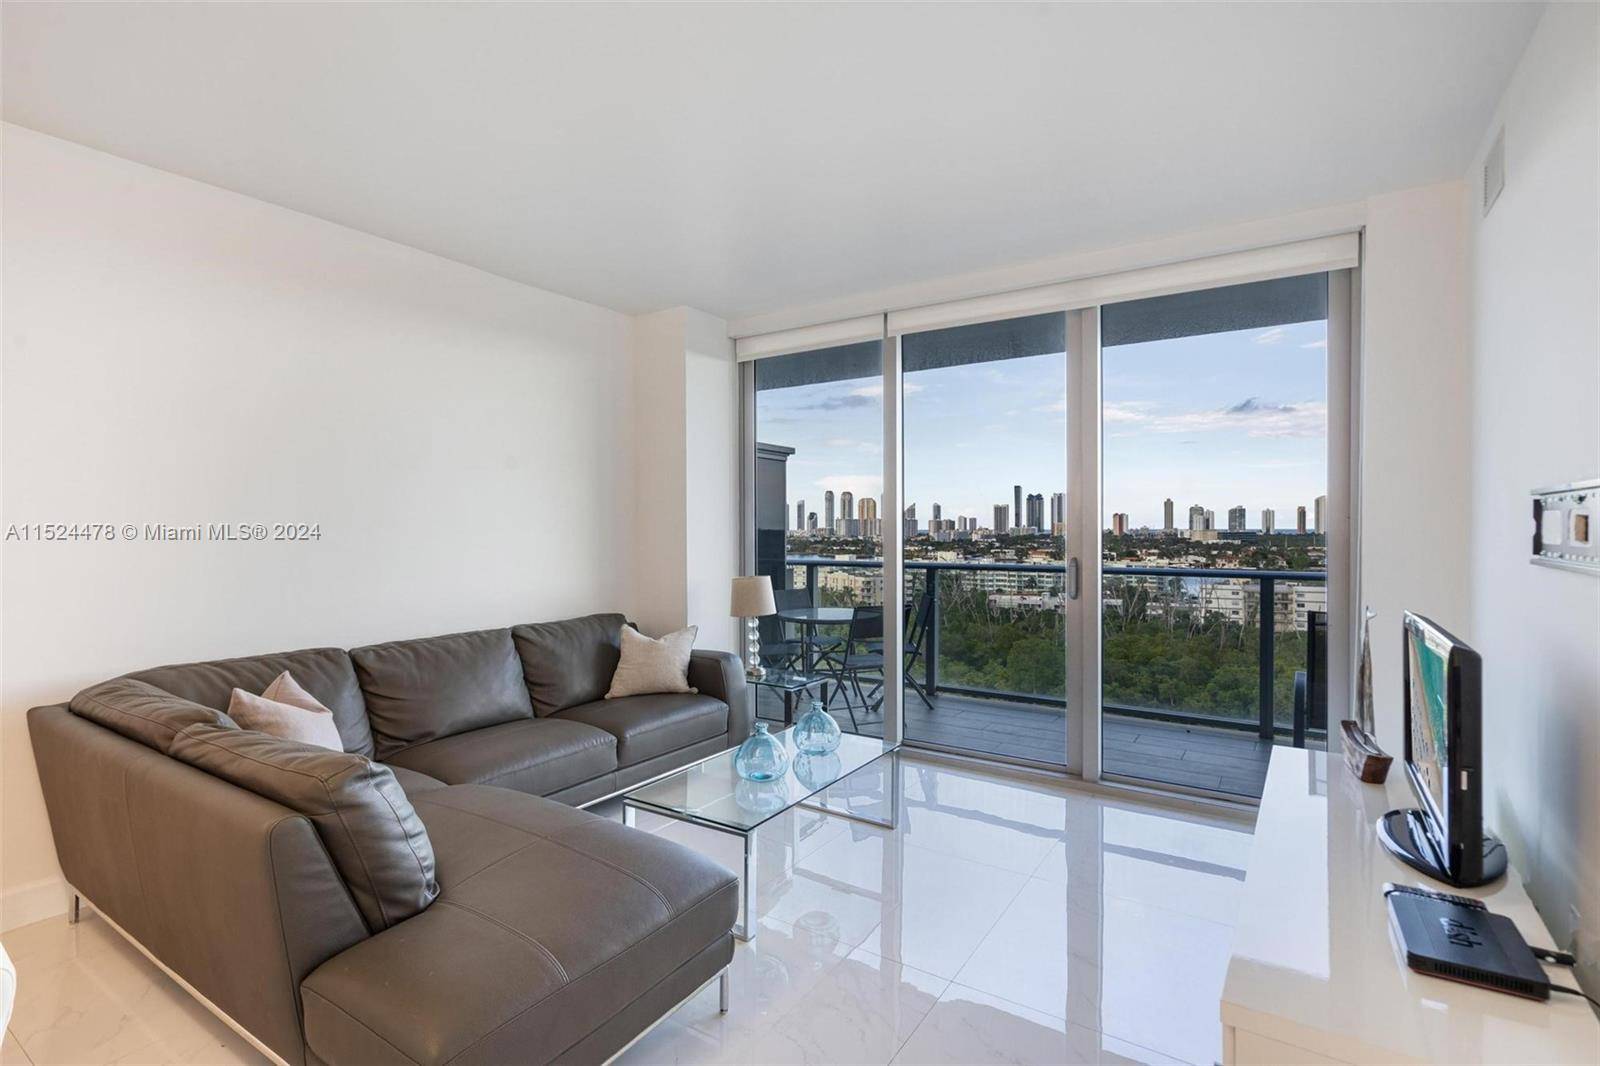 Live and Breath taking ocean intercostal views every day, the live that you deserve is here at The Harbour, with porcelain floors, open kitchen state of the art appliances, 24hr ...